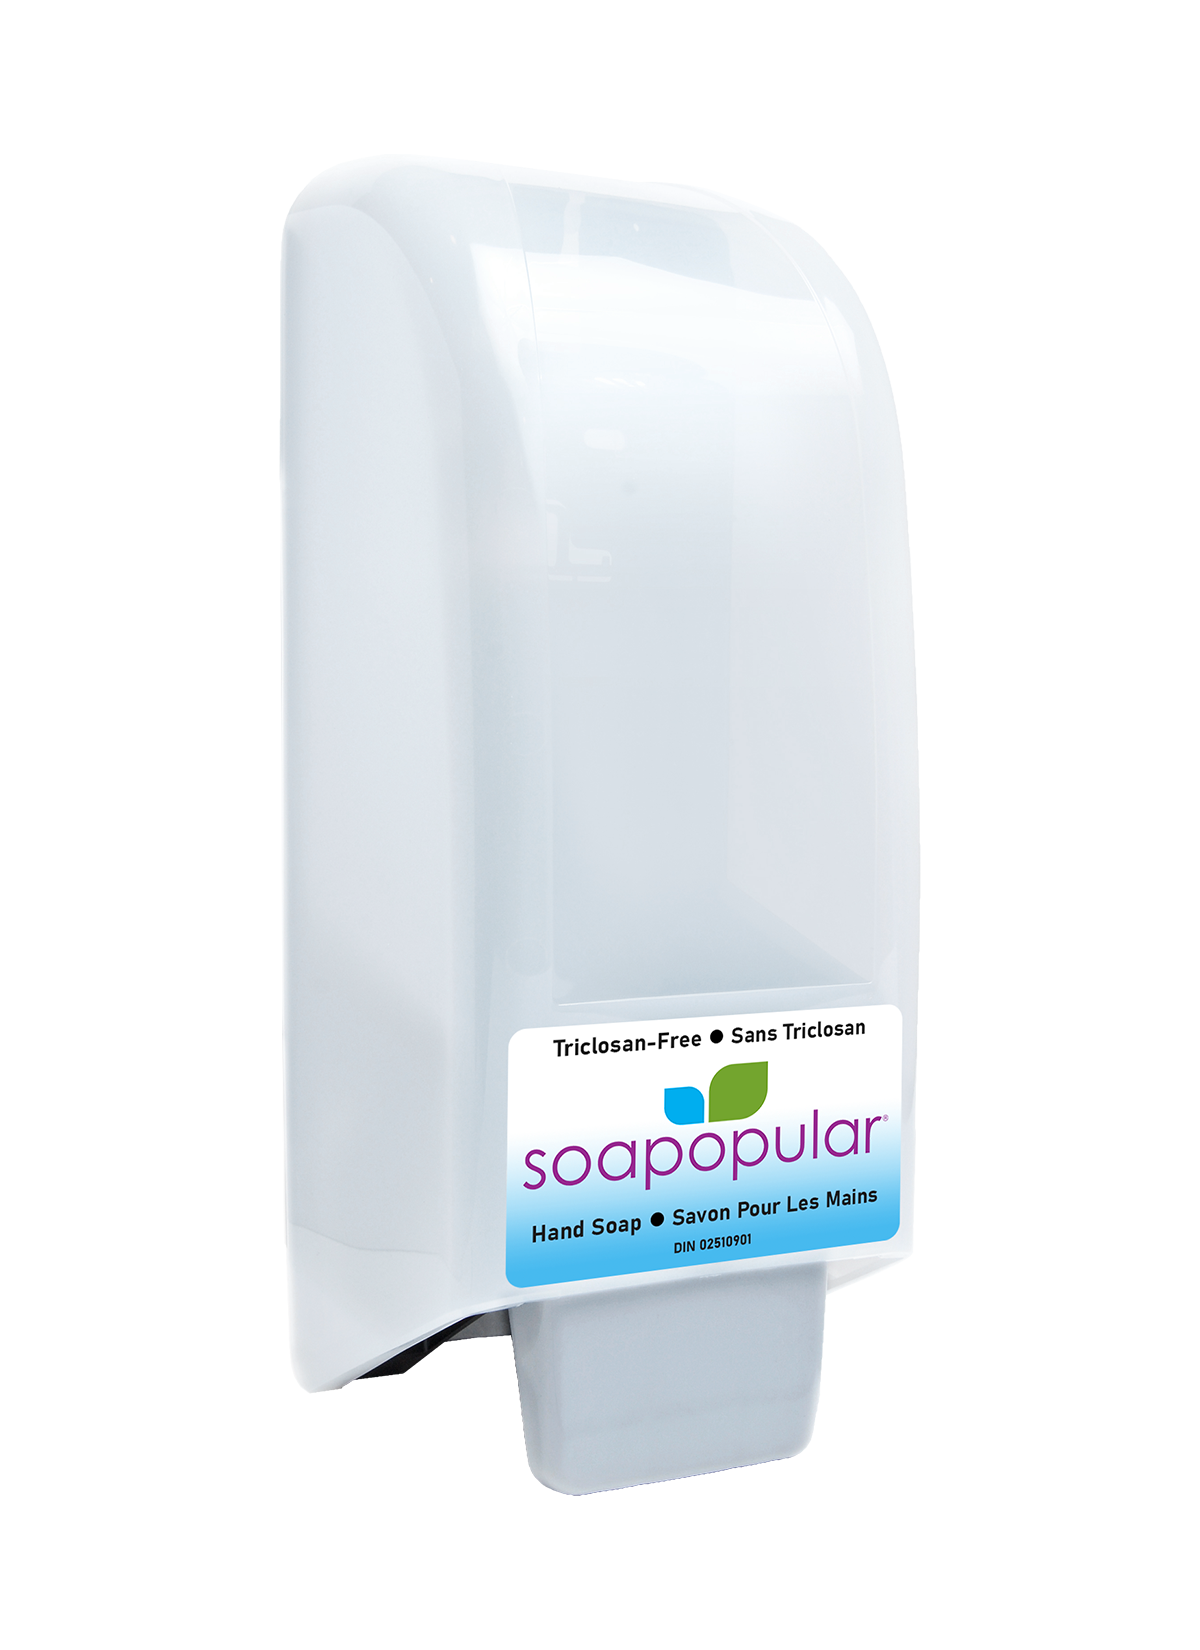 Soapopular triclosan free hand soap manual dispenser with a cover to discourage pilferage.